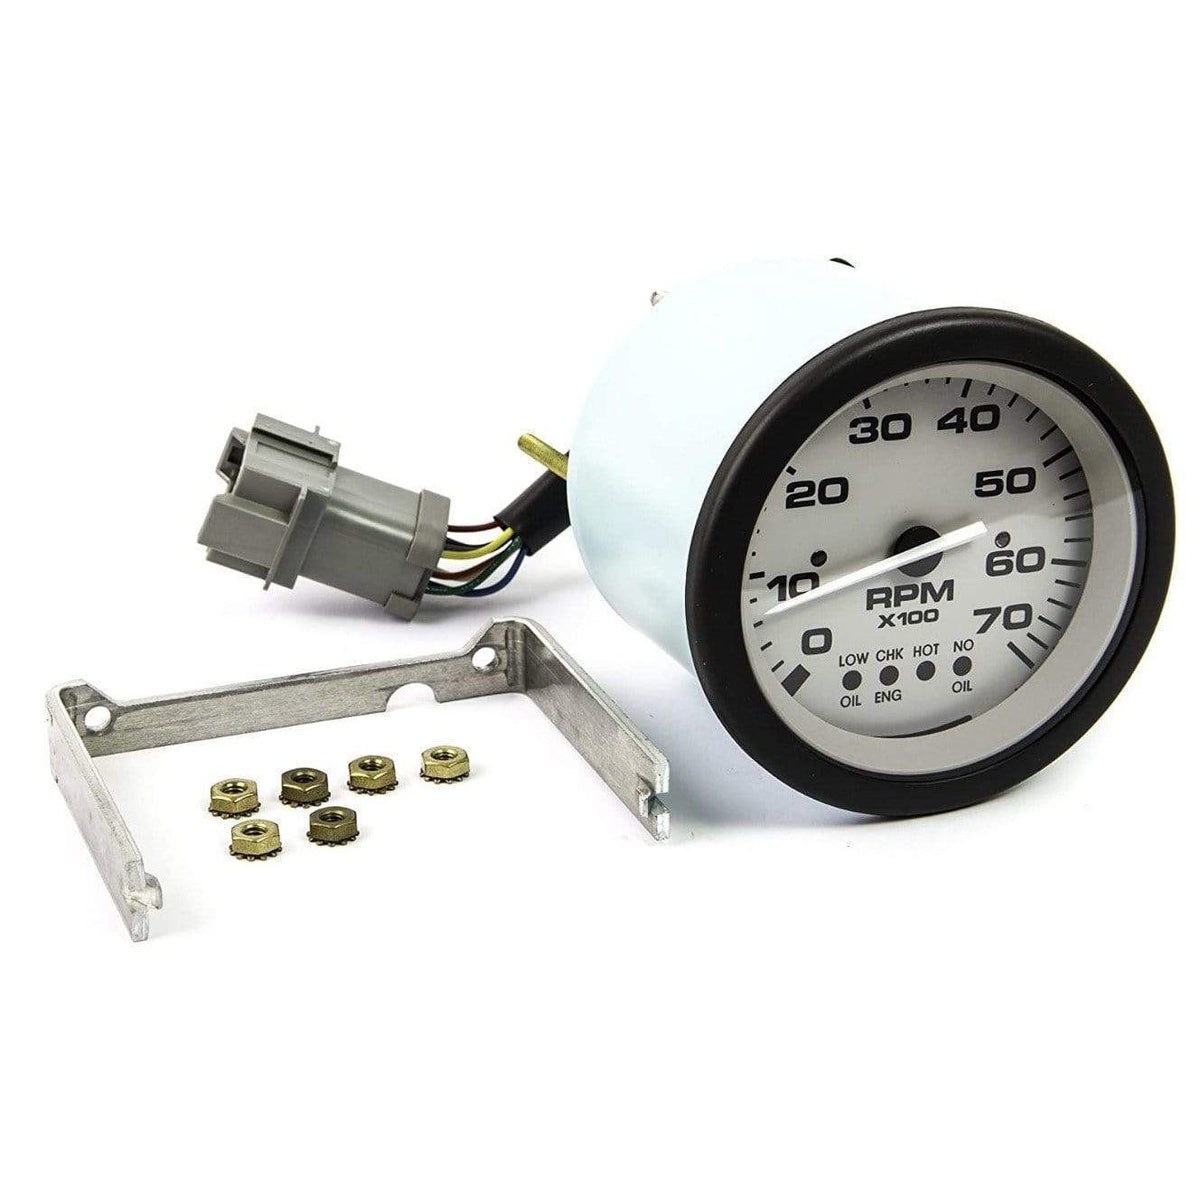 Teleflex Not Qualified for Free Shipping Teleflex Tach 7000 RPM Driftwood 3" BRP System Check #62698P